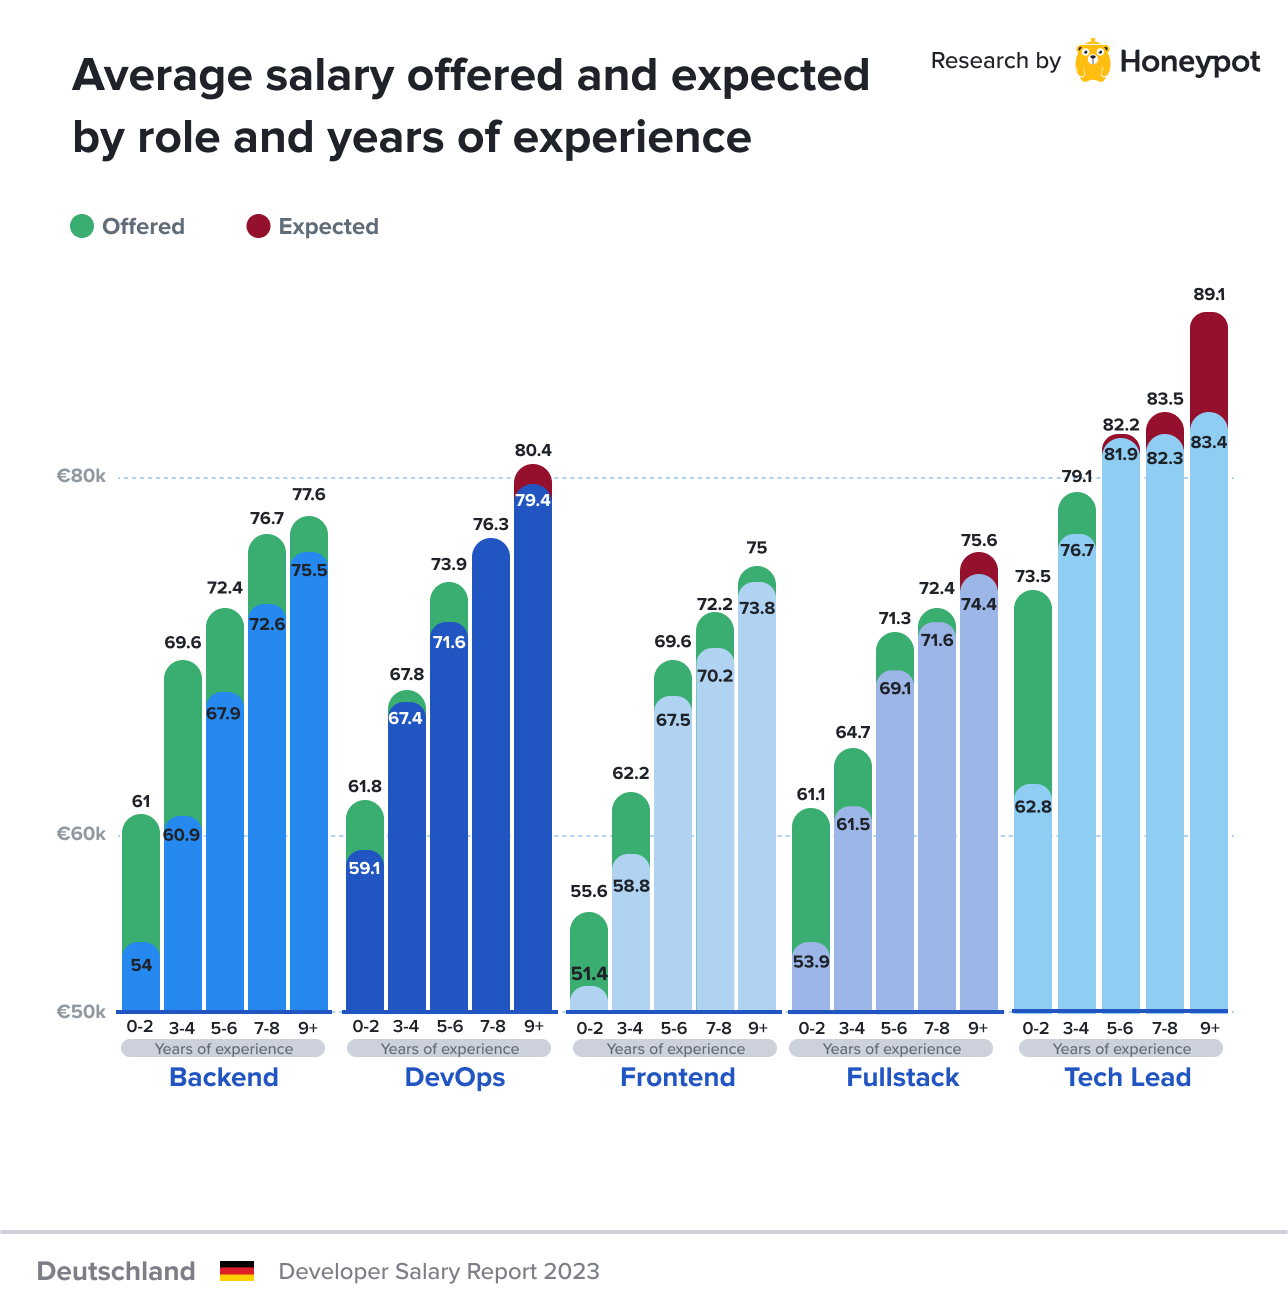 Germany – Average offered and expected salary by role and years of experience